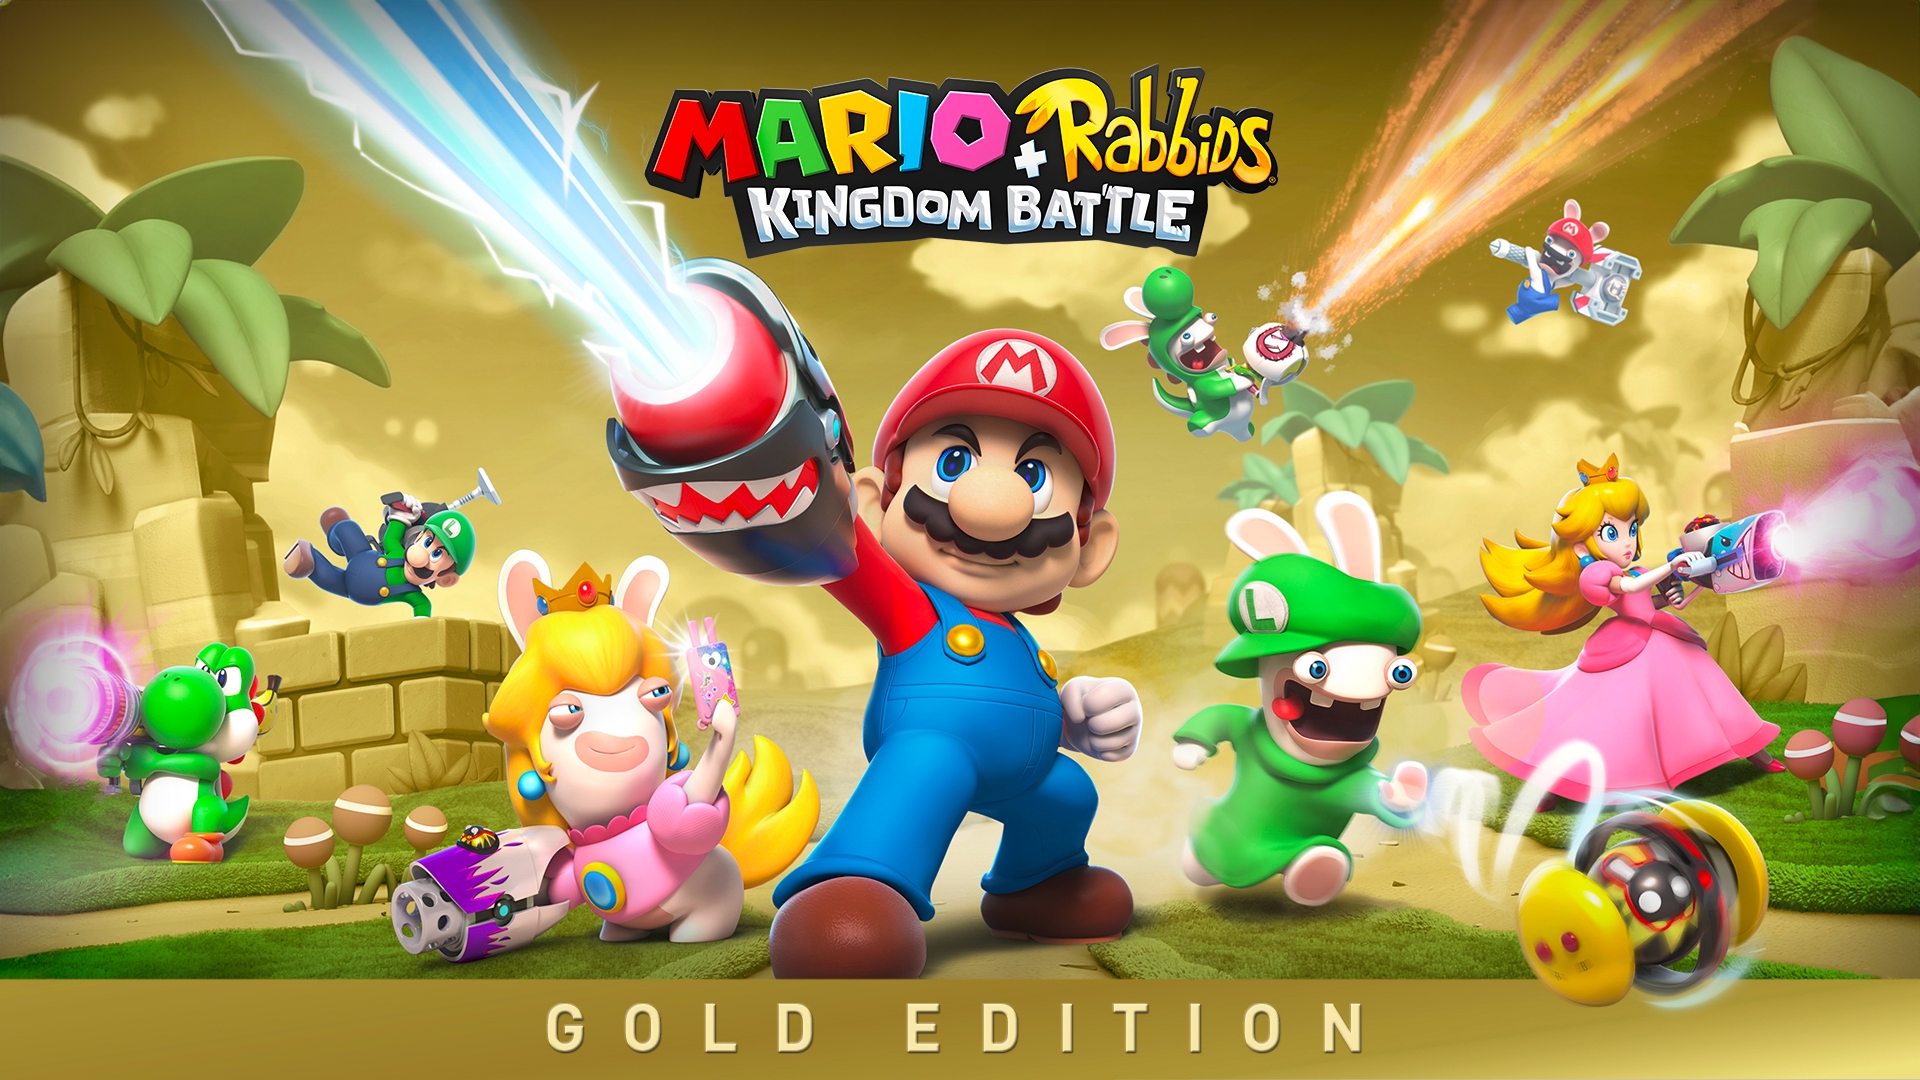 Switch - Mario+ The Lapins Crétins Kingdom Battle - Edition